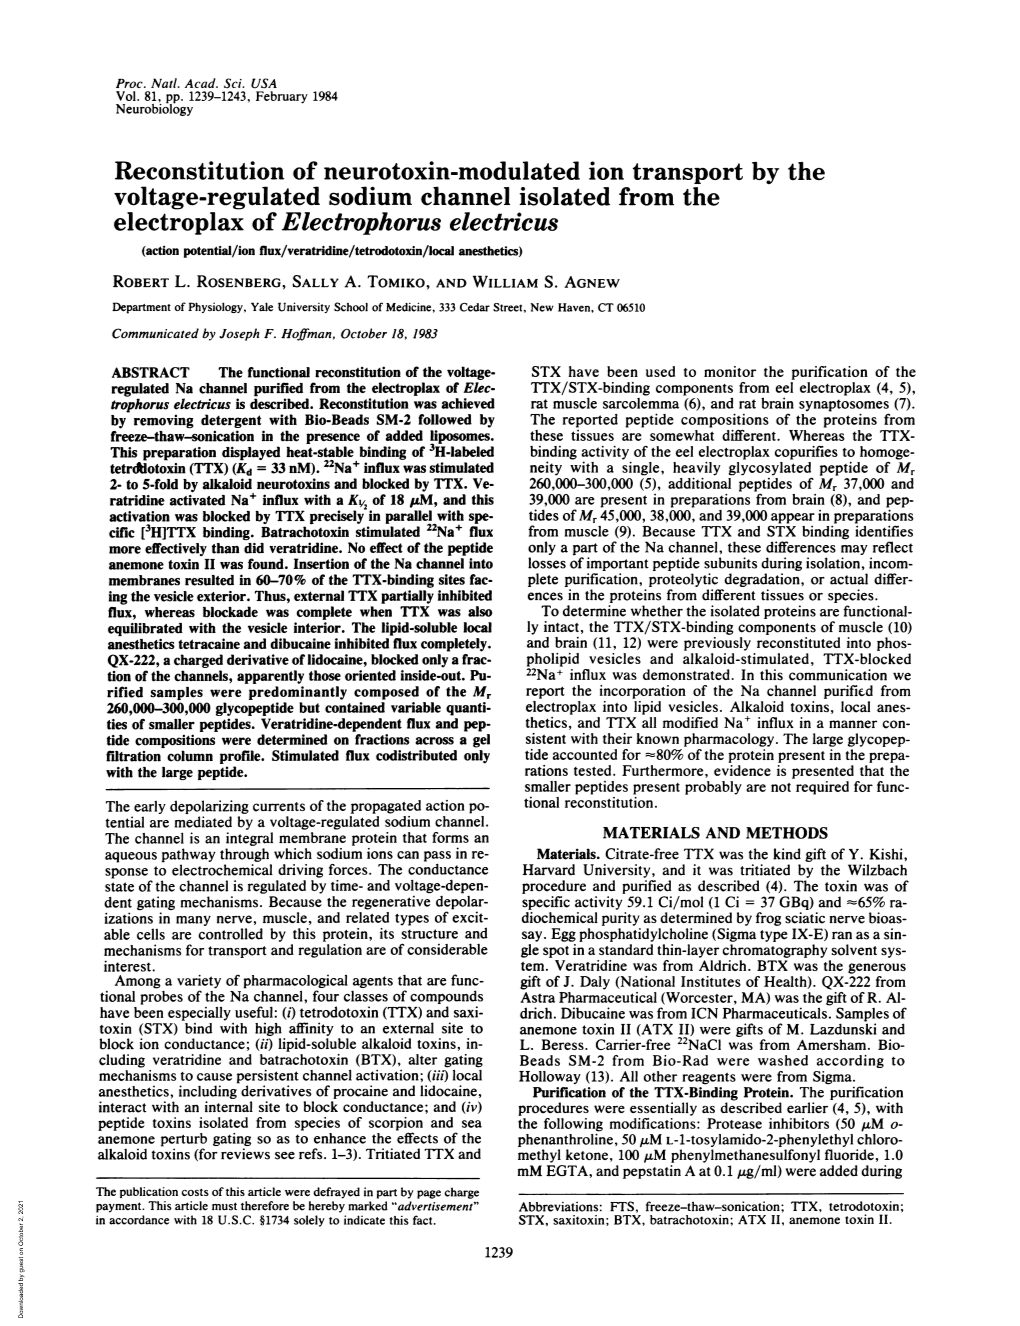 Reconstitution of Neurotoxin-Modulated Ion Transport